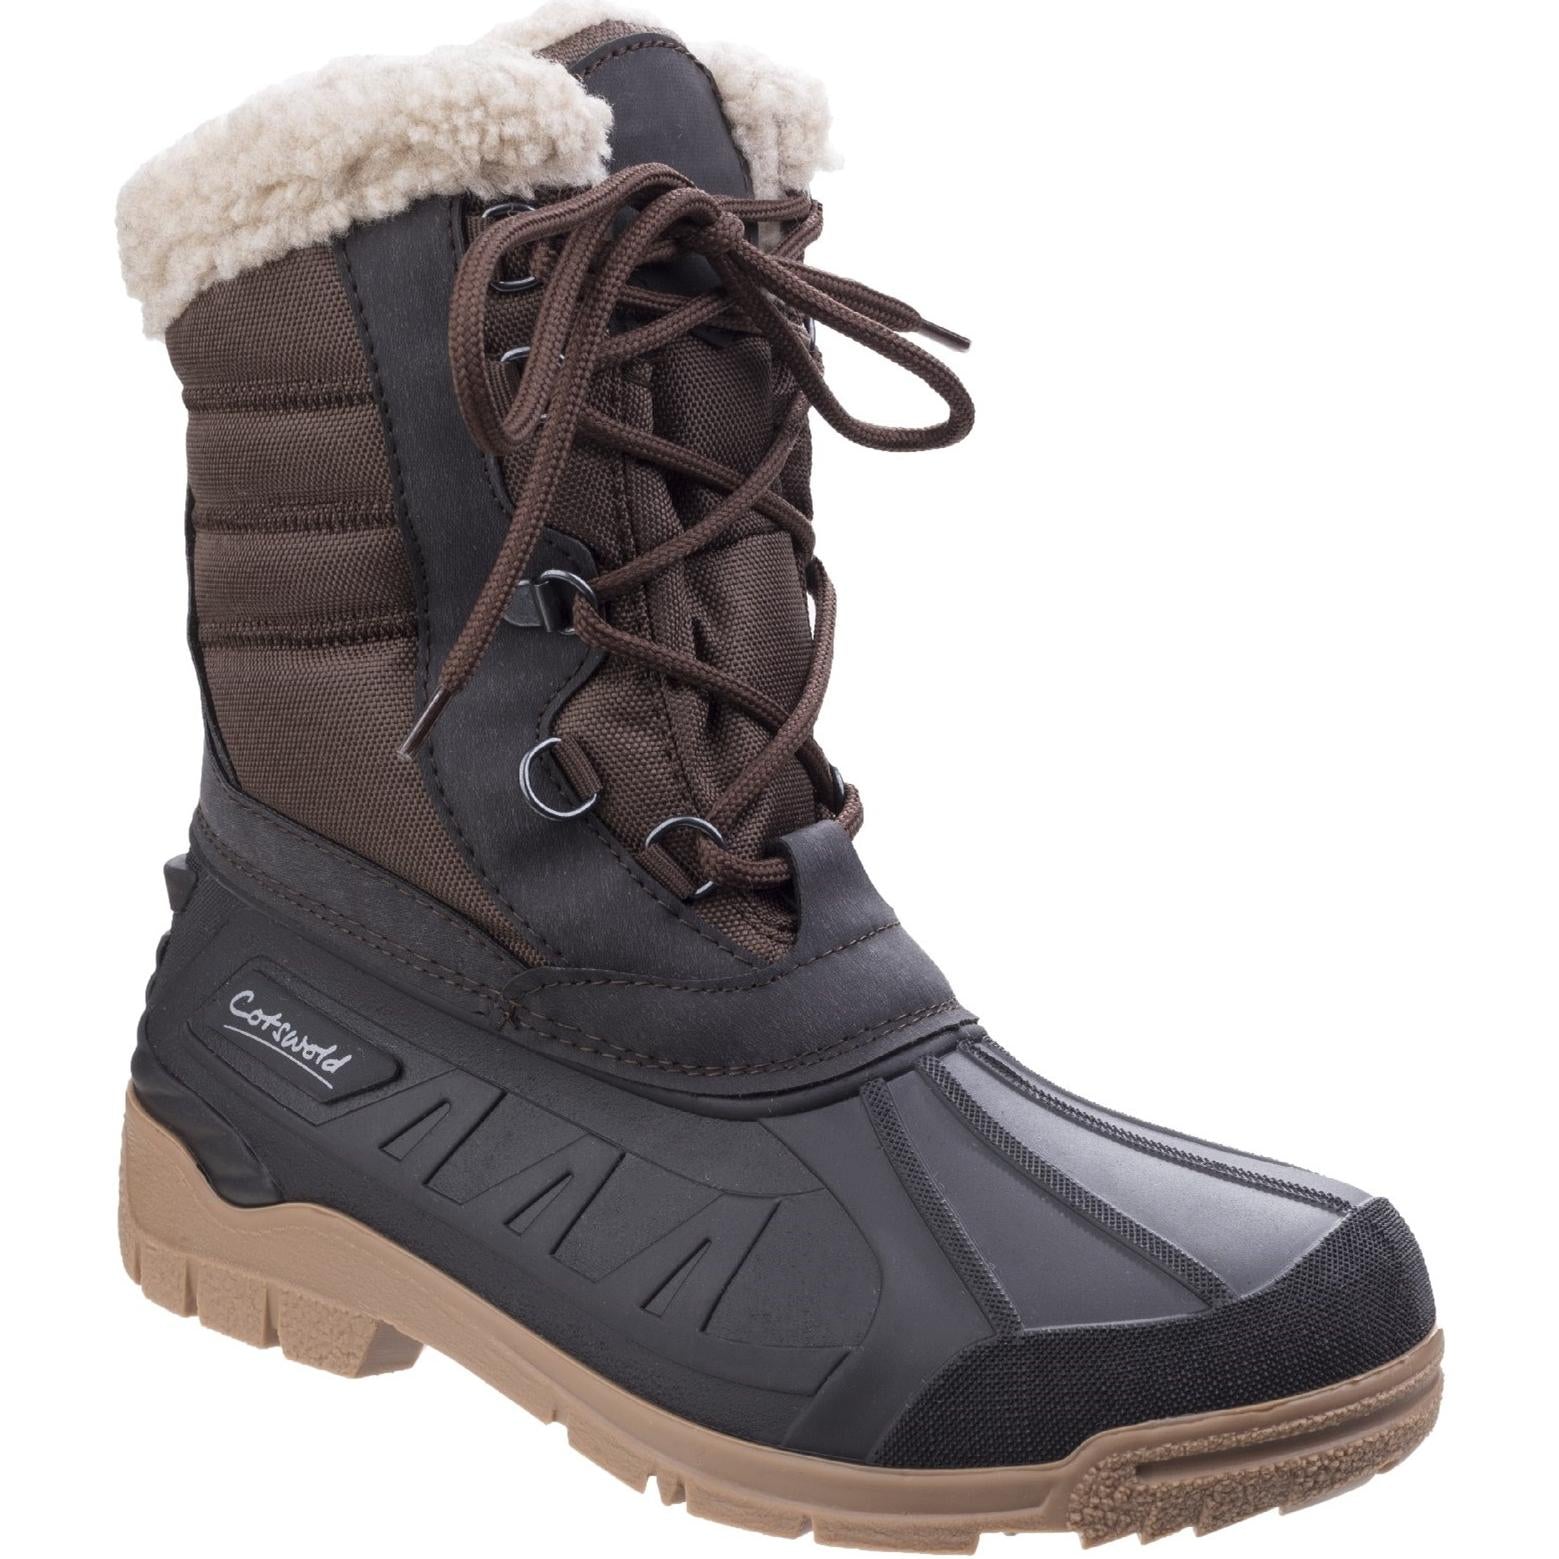 Cotswold Coset Weather Boot